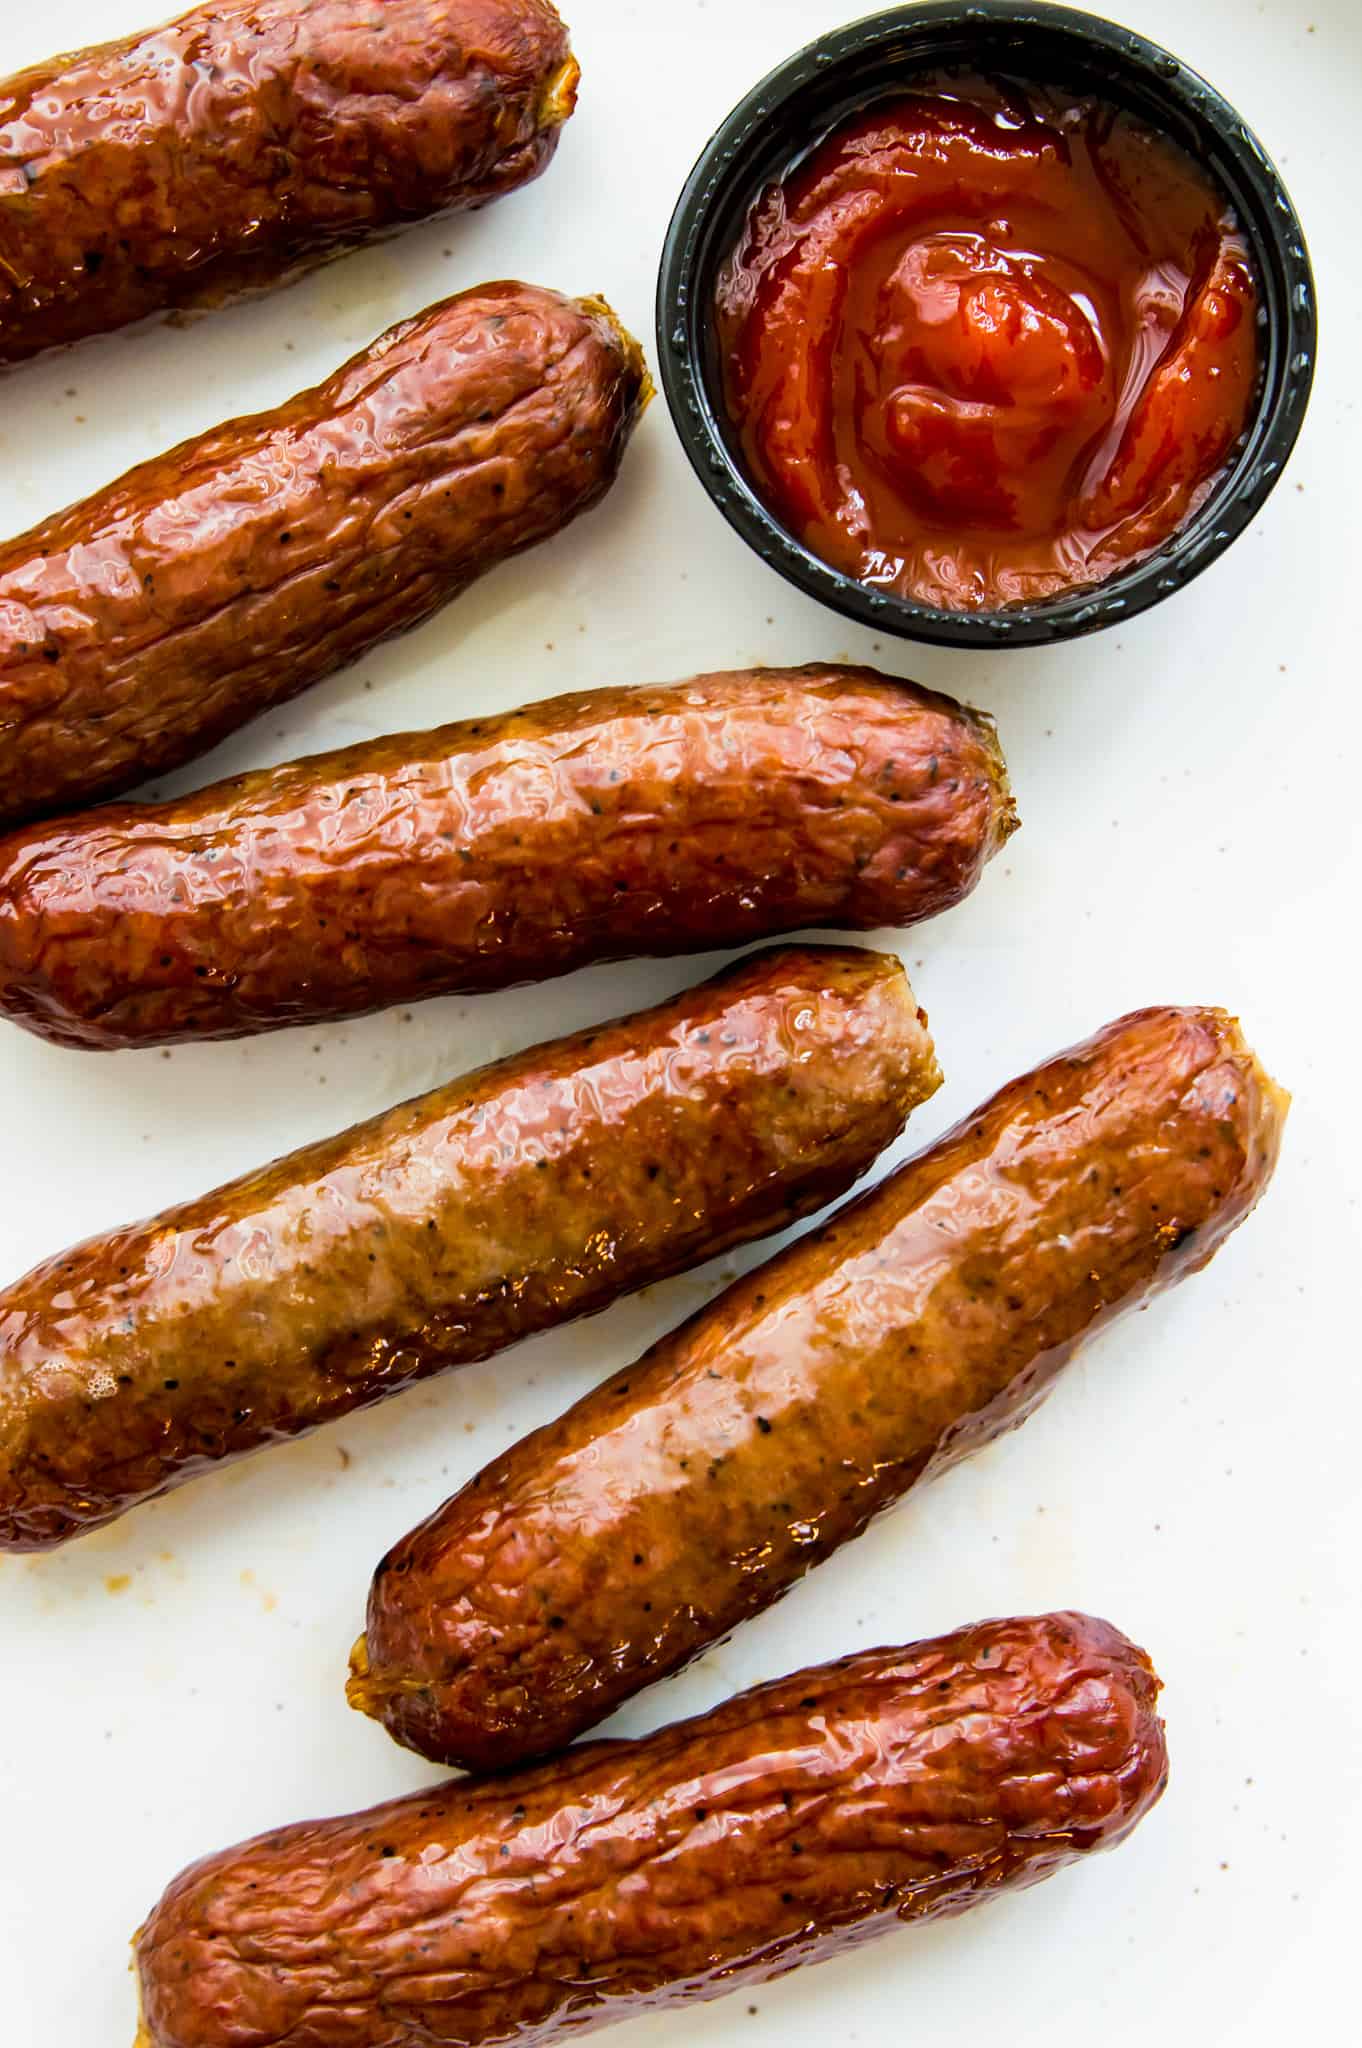 A plate with cooked Italian sausages on it with a side of ketchup.